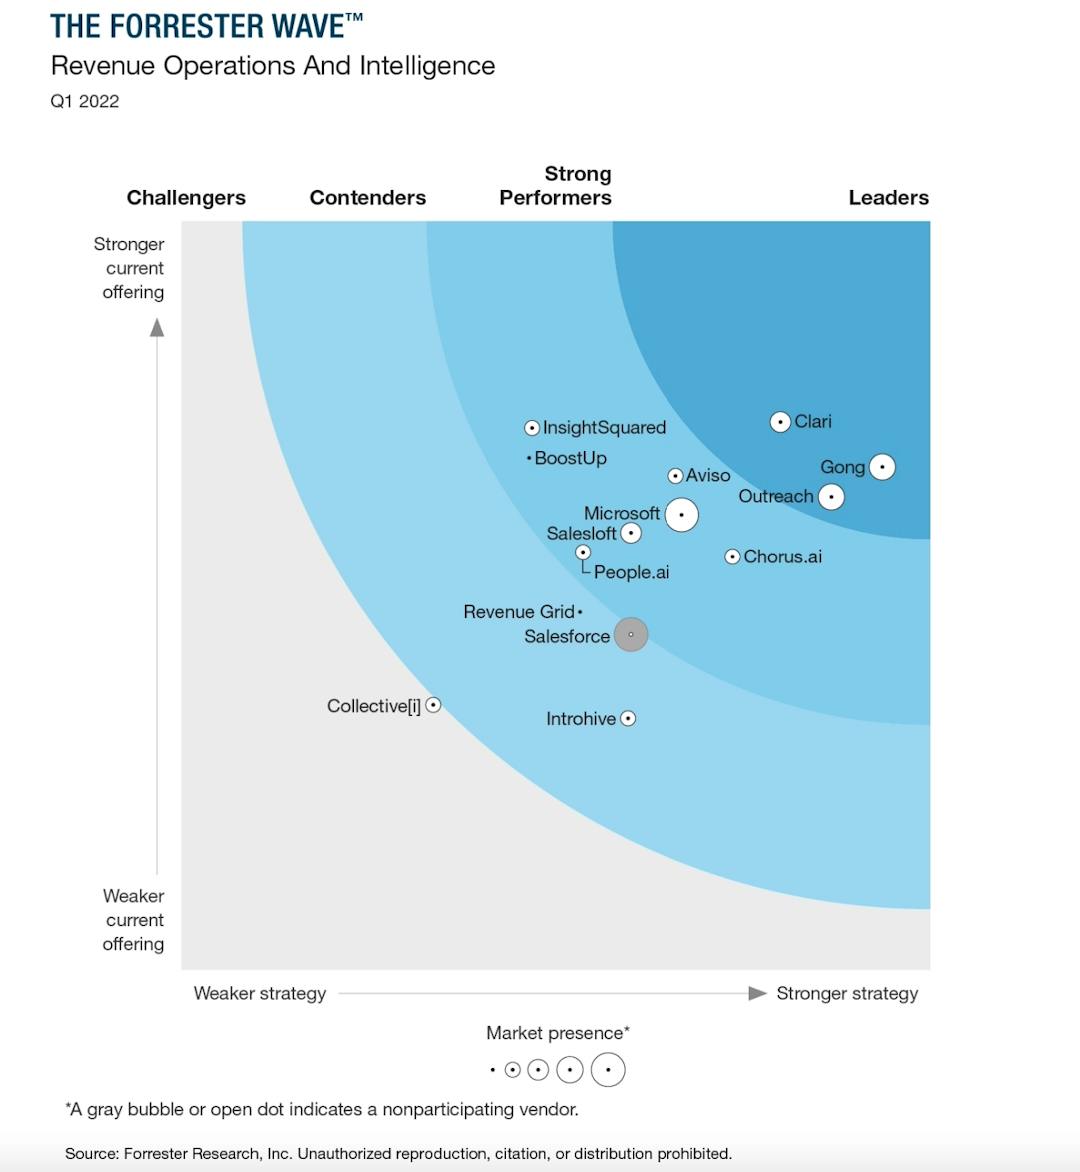 Aviso named a Strong Performer in The Forrester Wave™: Revenue Operations And Intelligence, Q1 2022